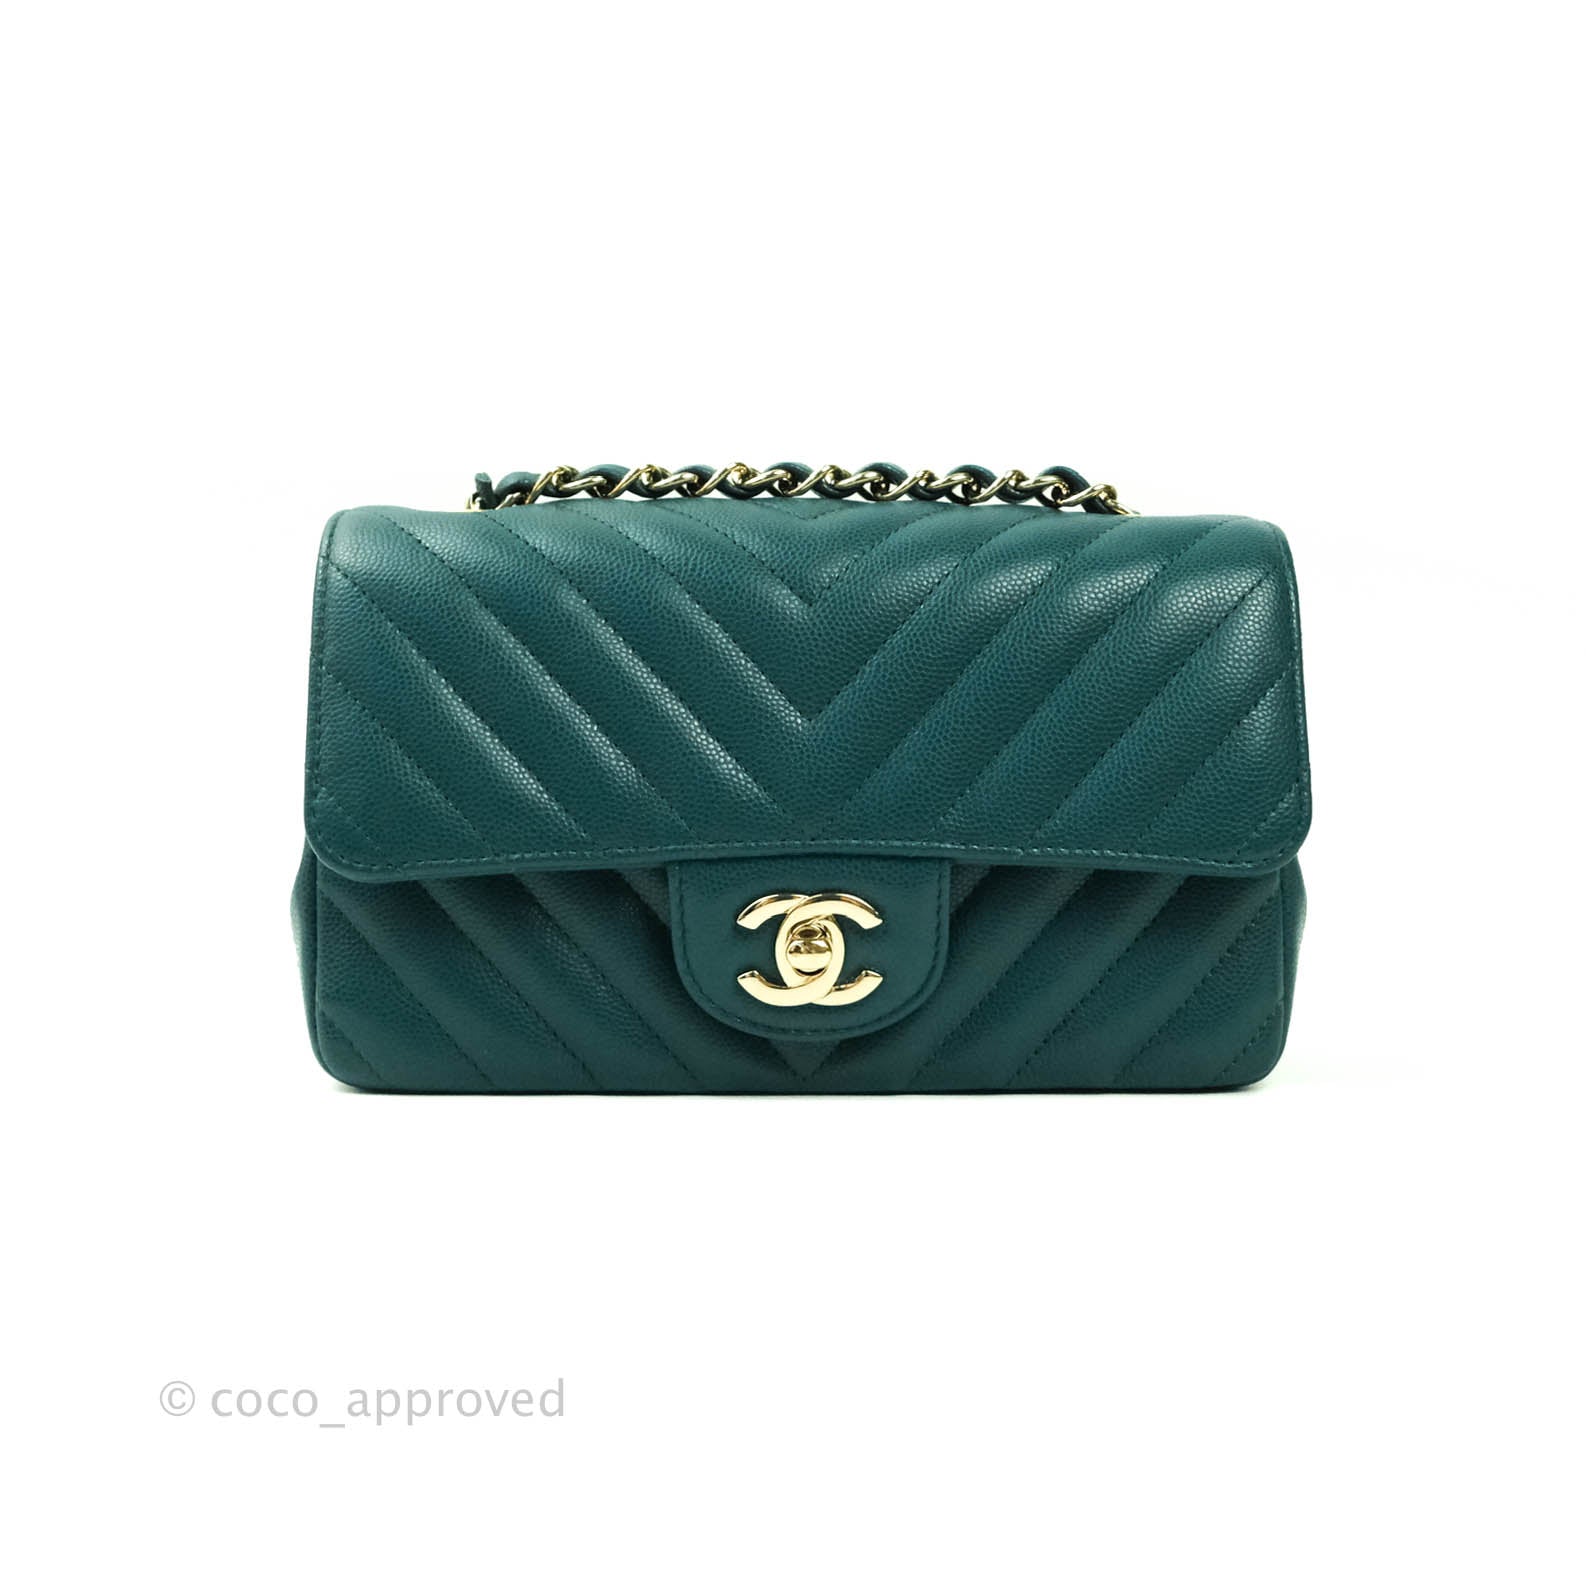 4+ Thousand Chanel Bag Royalty-Free Images, Stock Photos